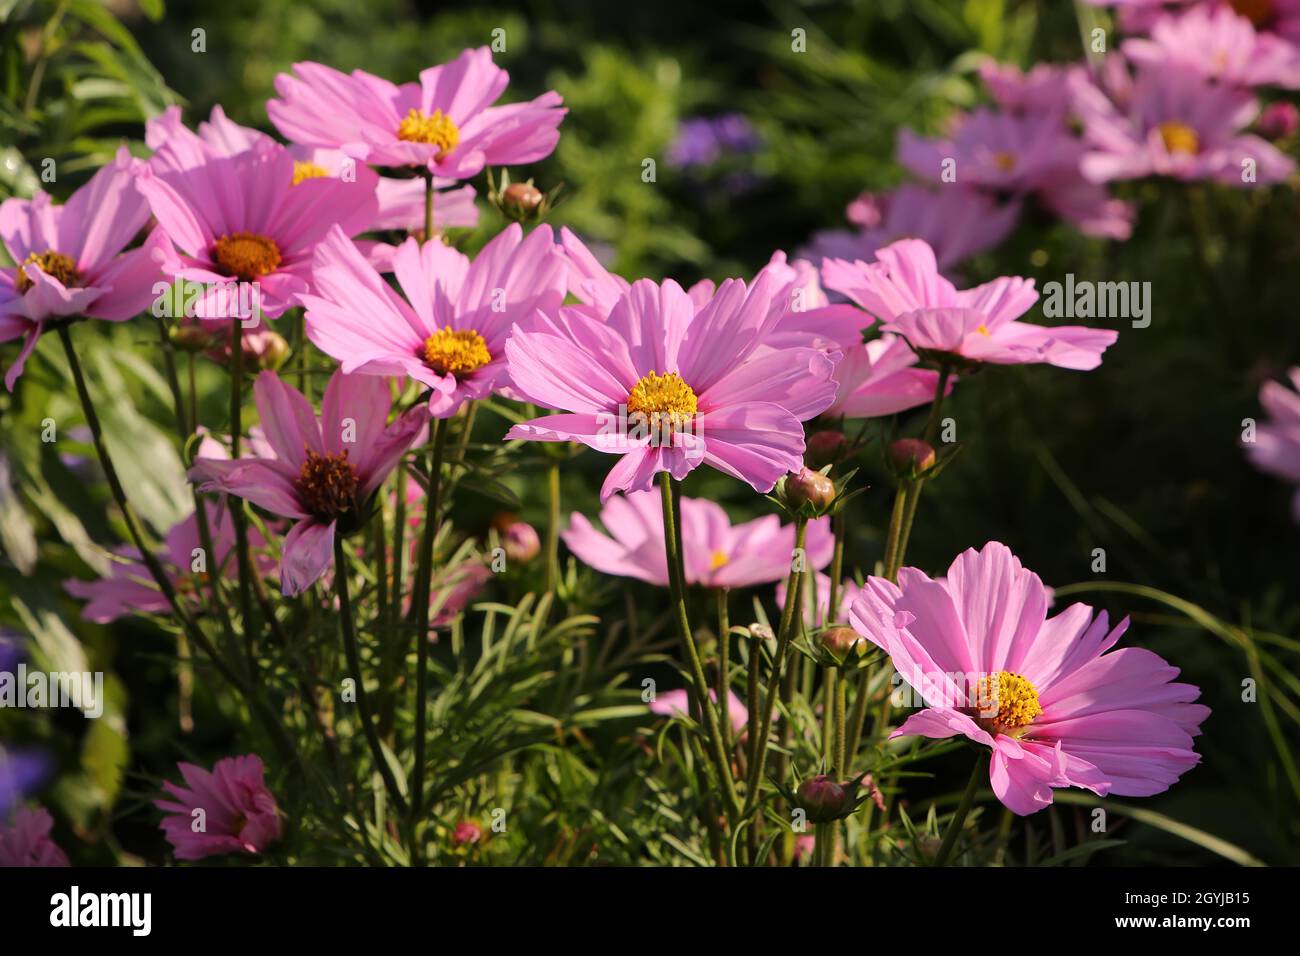 Beautiful pink flowers with yellow center in a natural garden green setting, situated in a public park, Alesund, Norway. Stock Photo